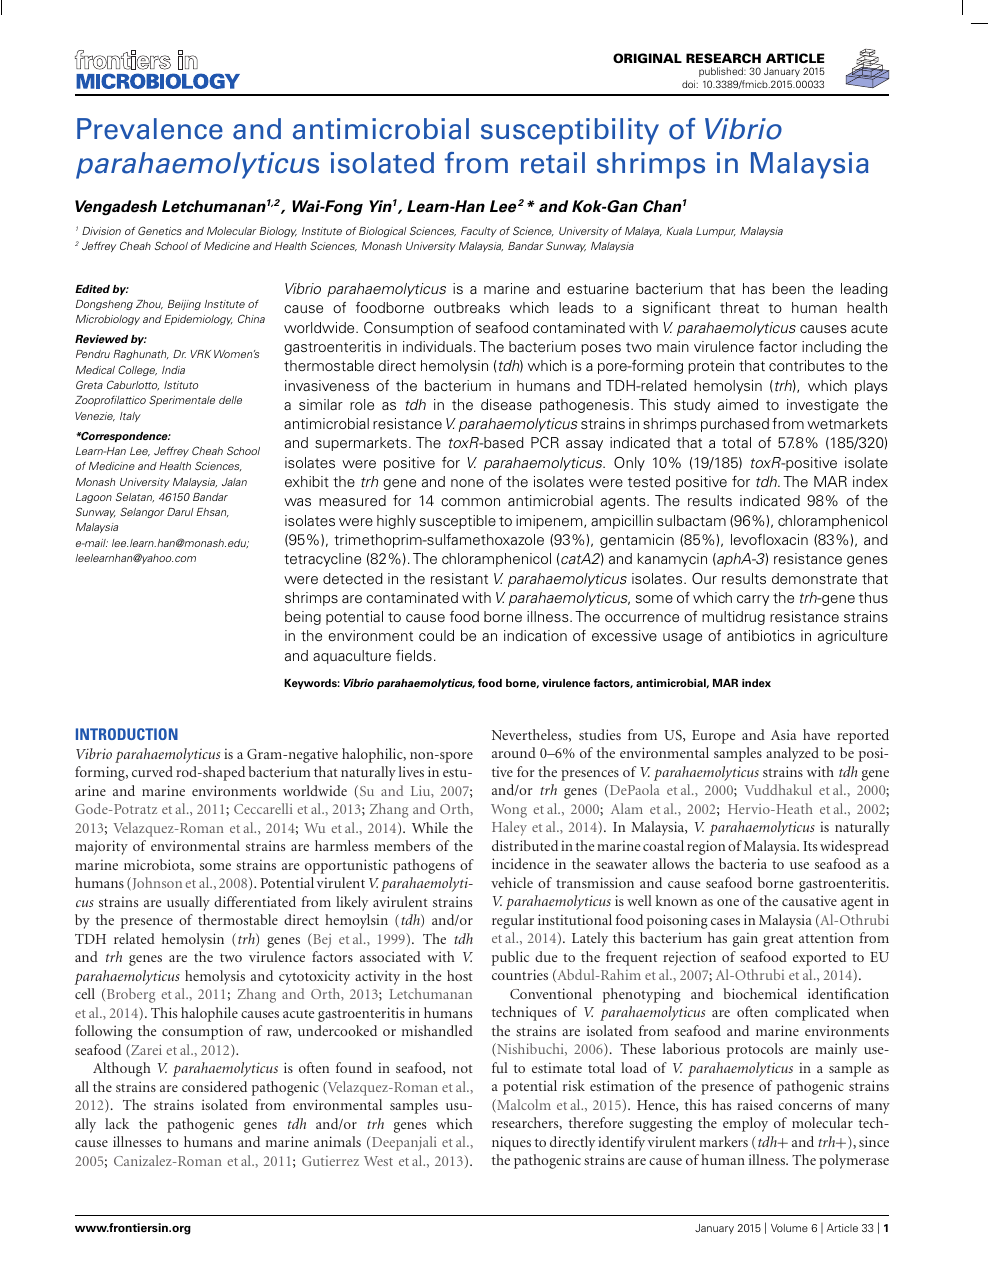 Prevalence And Antimicrobial Susceptibility Of Vibrio Parahaemolyticus Isolated From Retail Shrimps In Malaysia Topic Of Research Paper In Biological Sciences Download Scholarly Article Pdf And Read For Free On Cyberleninka Open